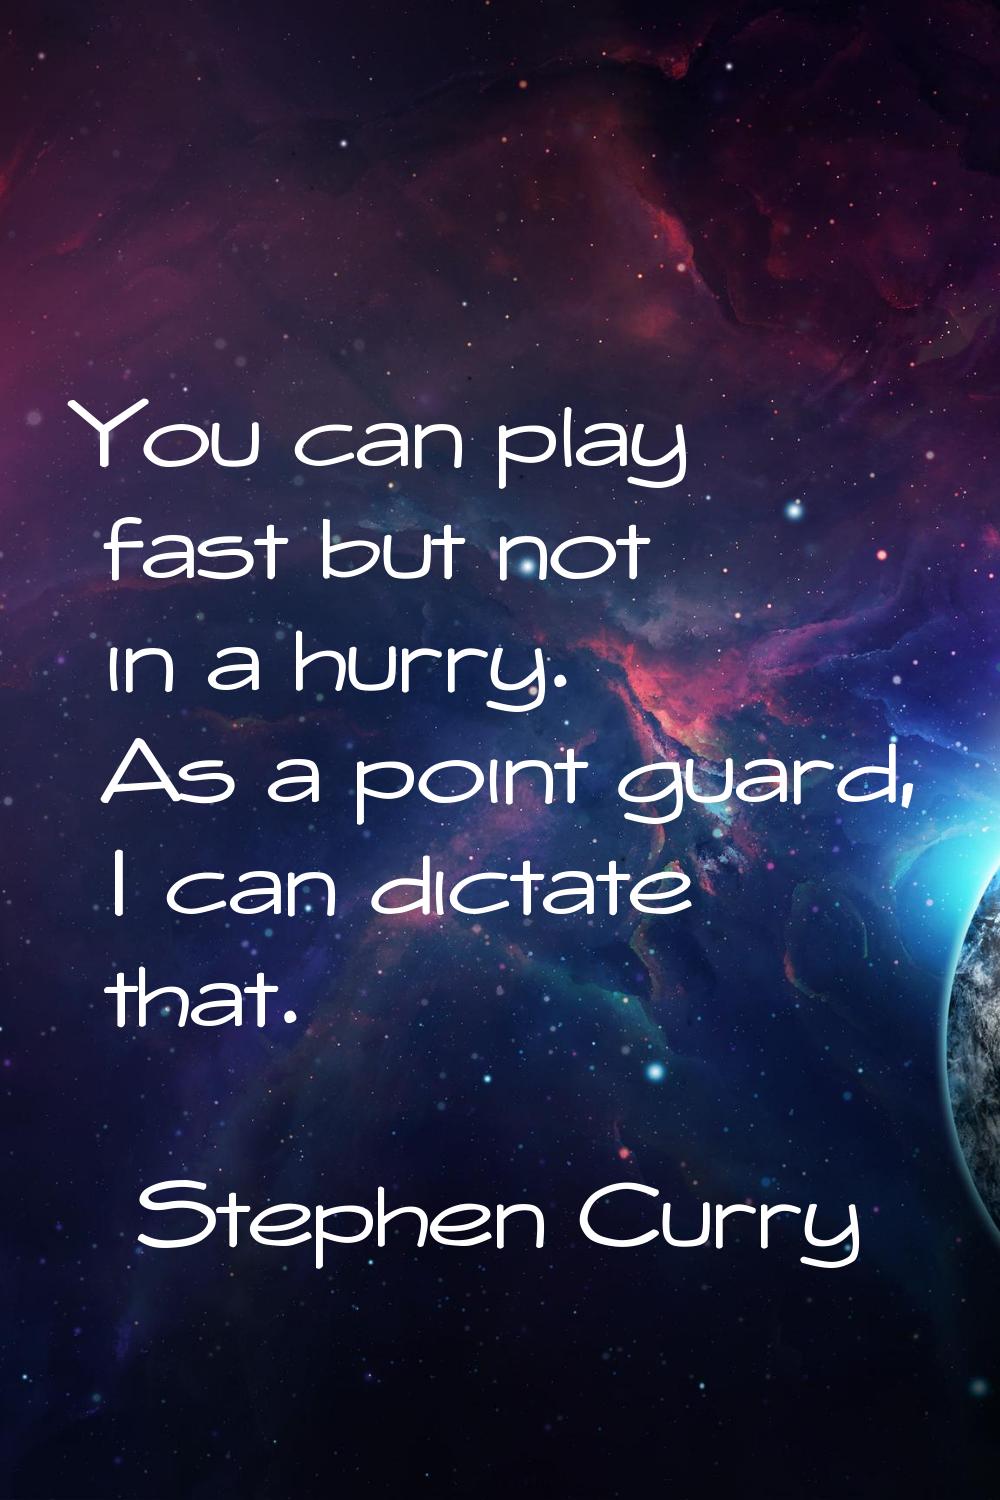 You can play fast but not in a hurry. As a point guard, I can dictate that.